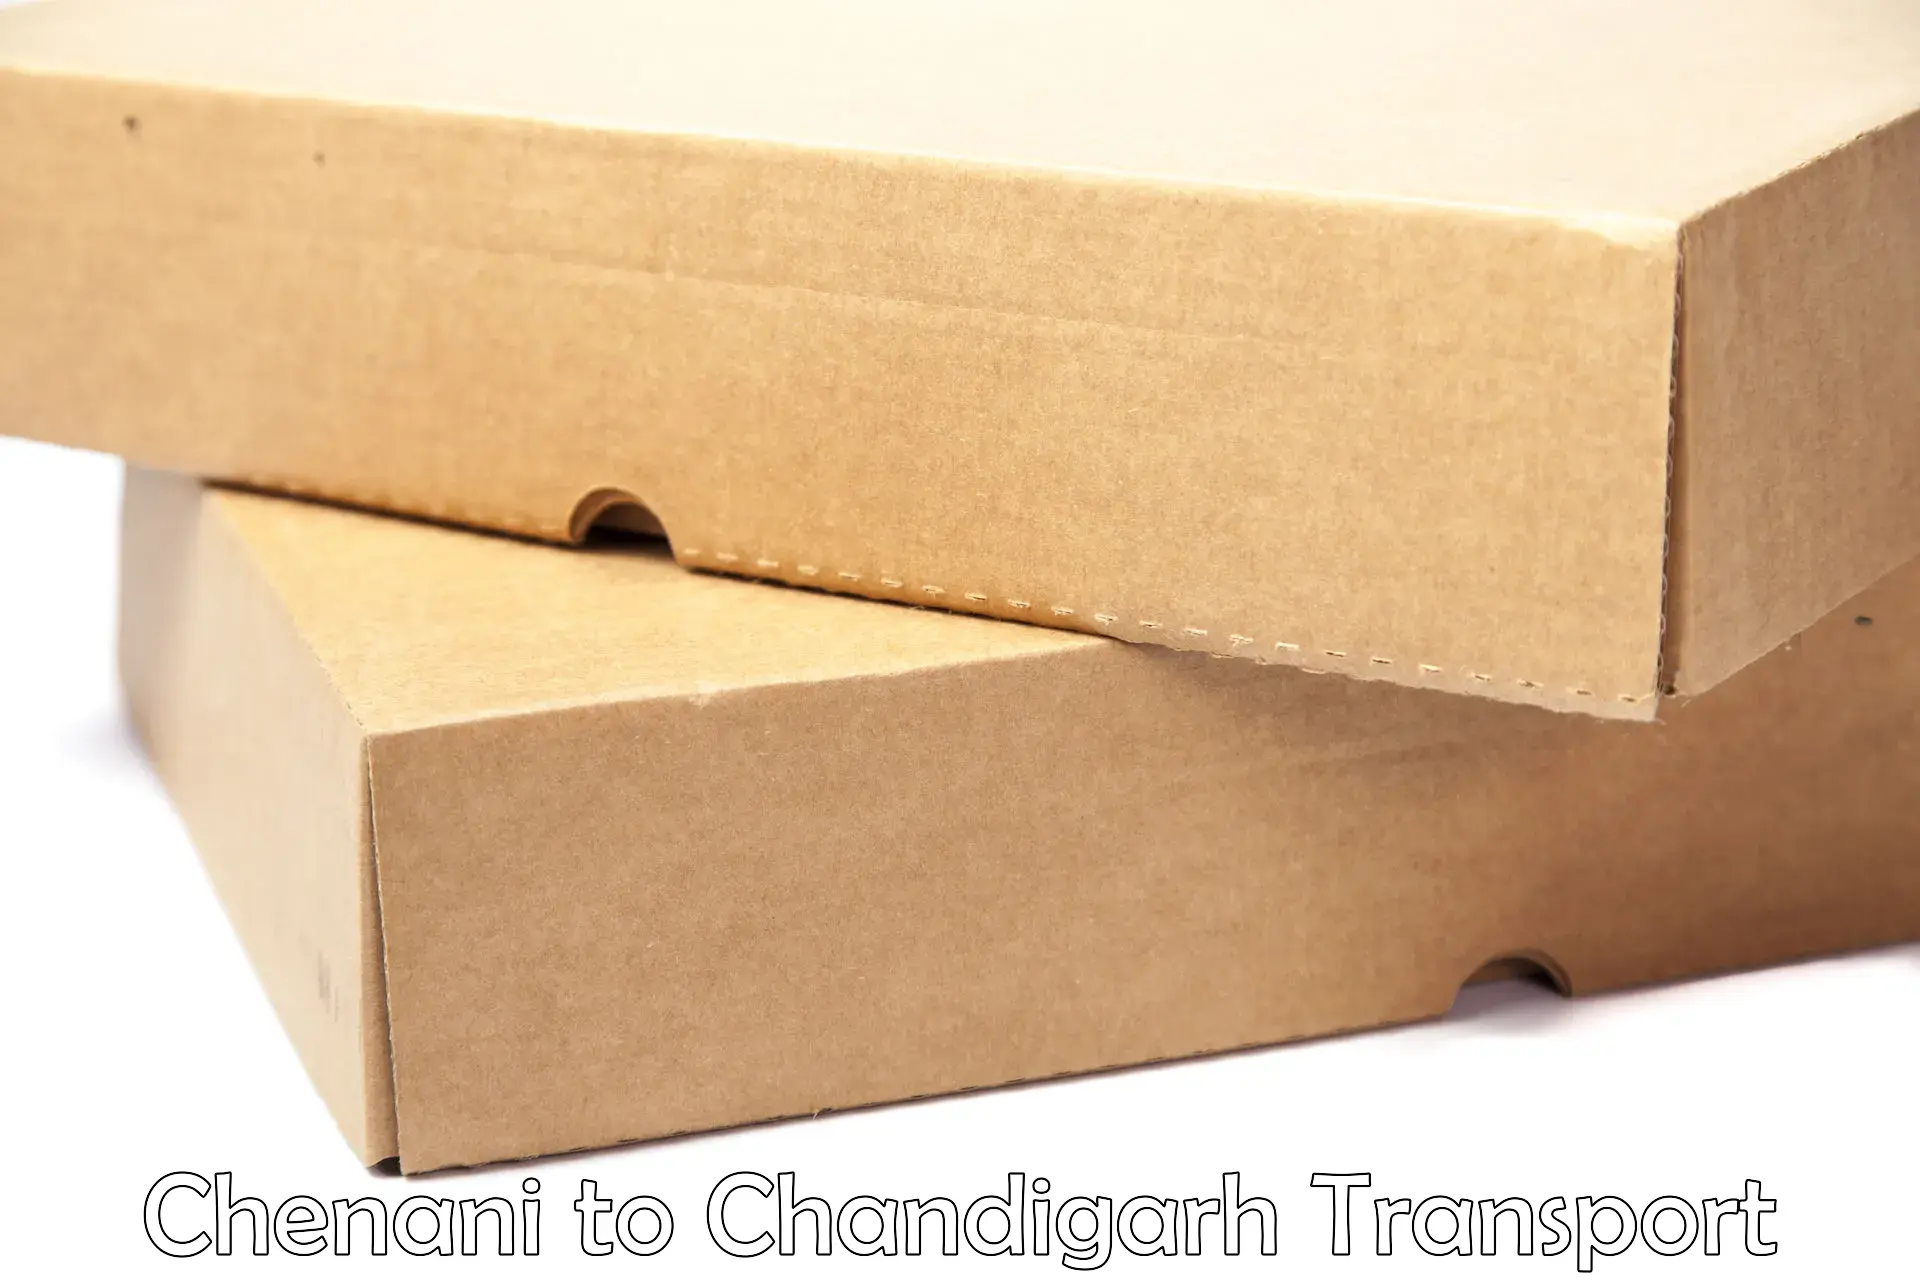 Truck transport companies in India Chenani to Chandigarh